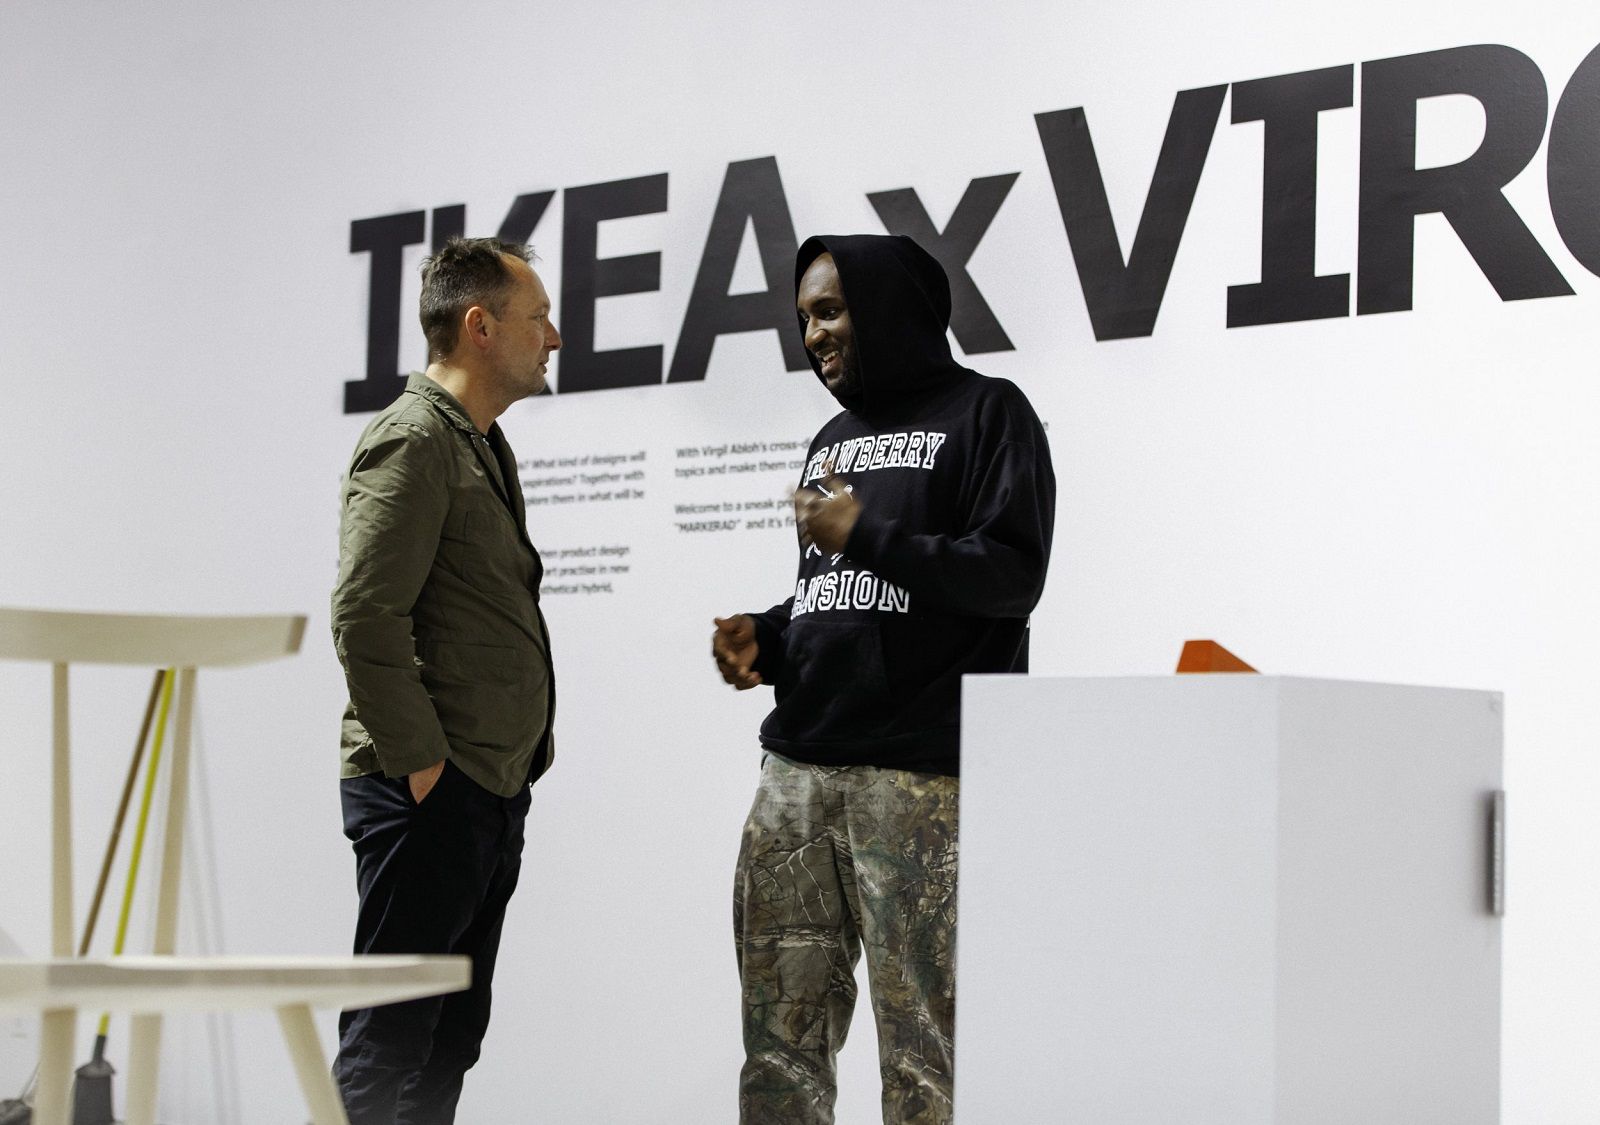 Virgil Abloh x IKEA: pricelist and release date